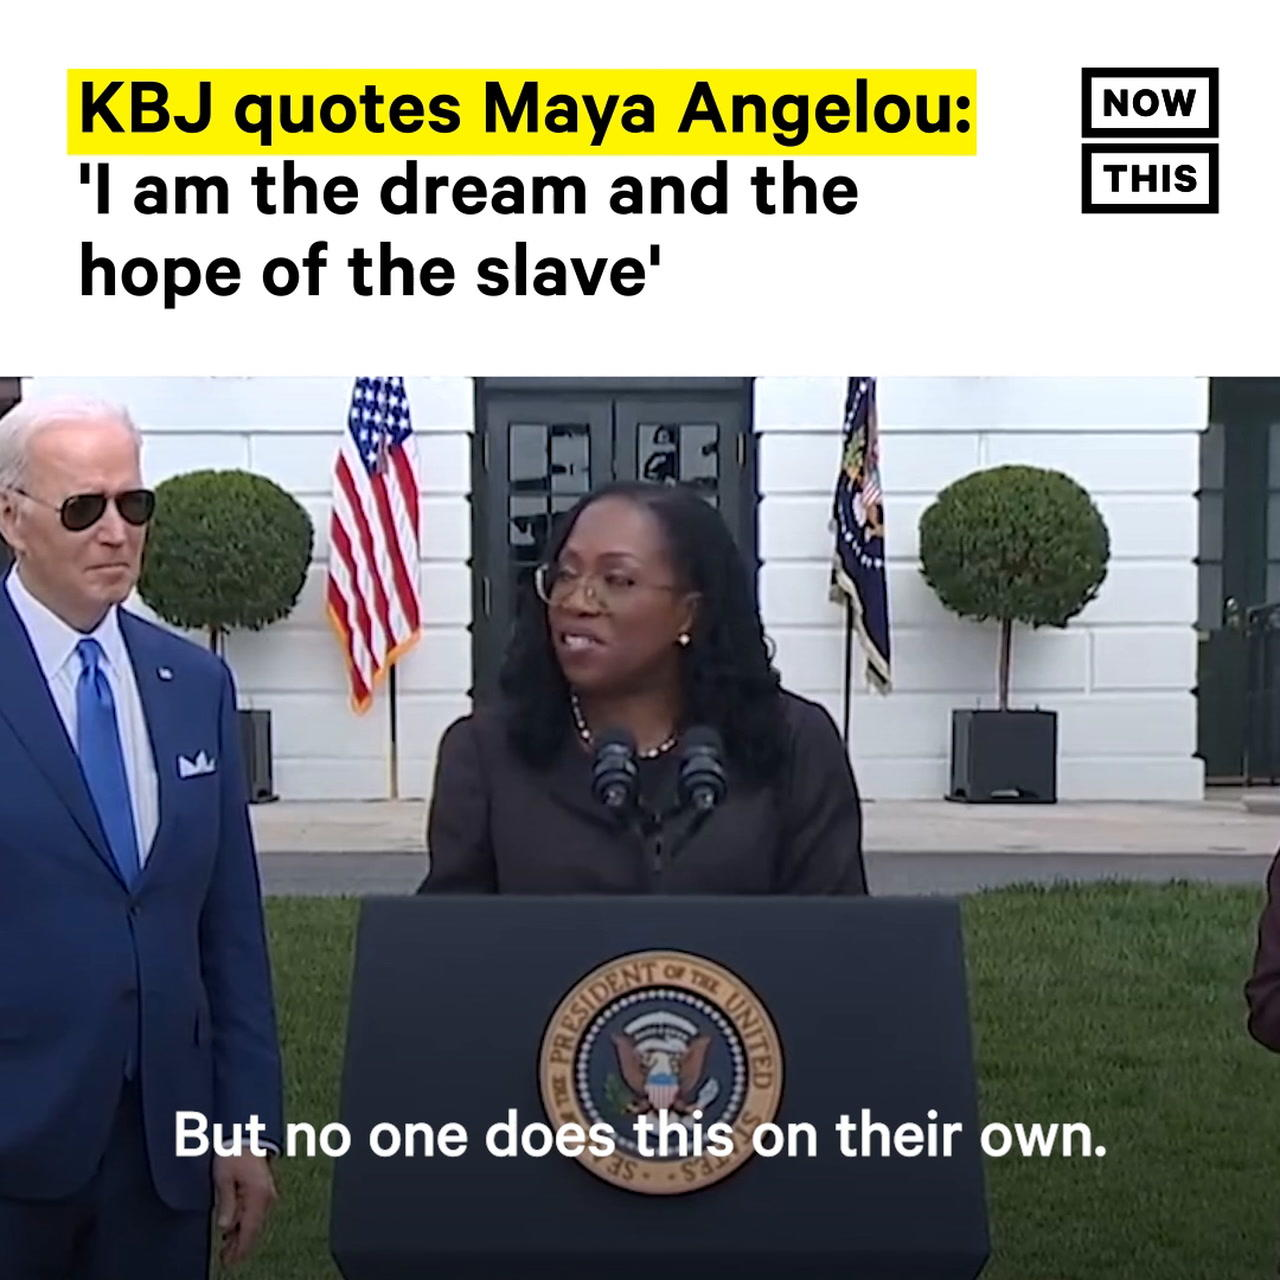 KBJ Quotes Maya Angelou in Speech After Historic Supreme Court Confirmation